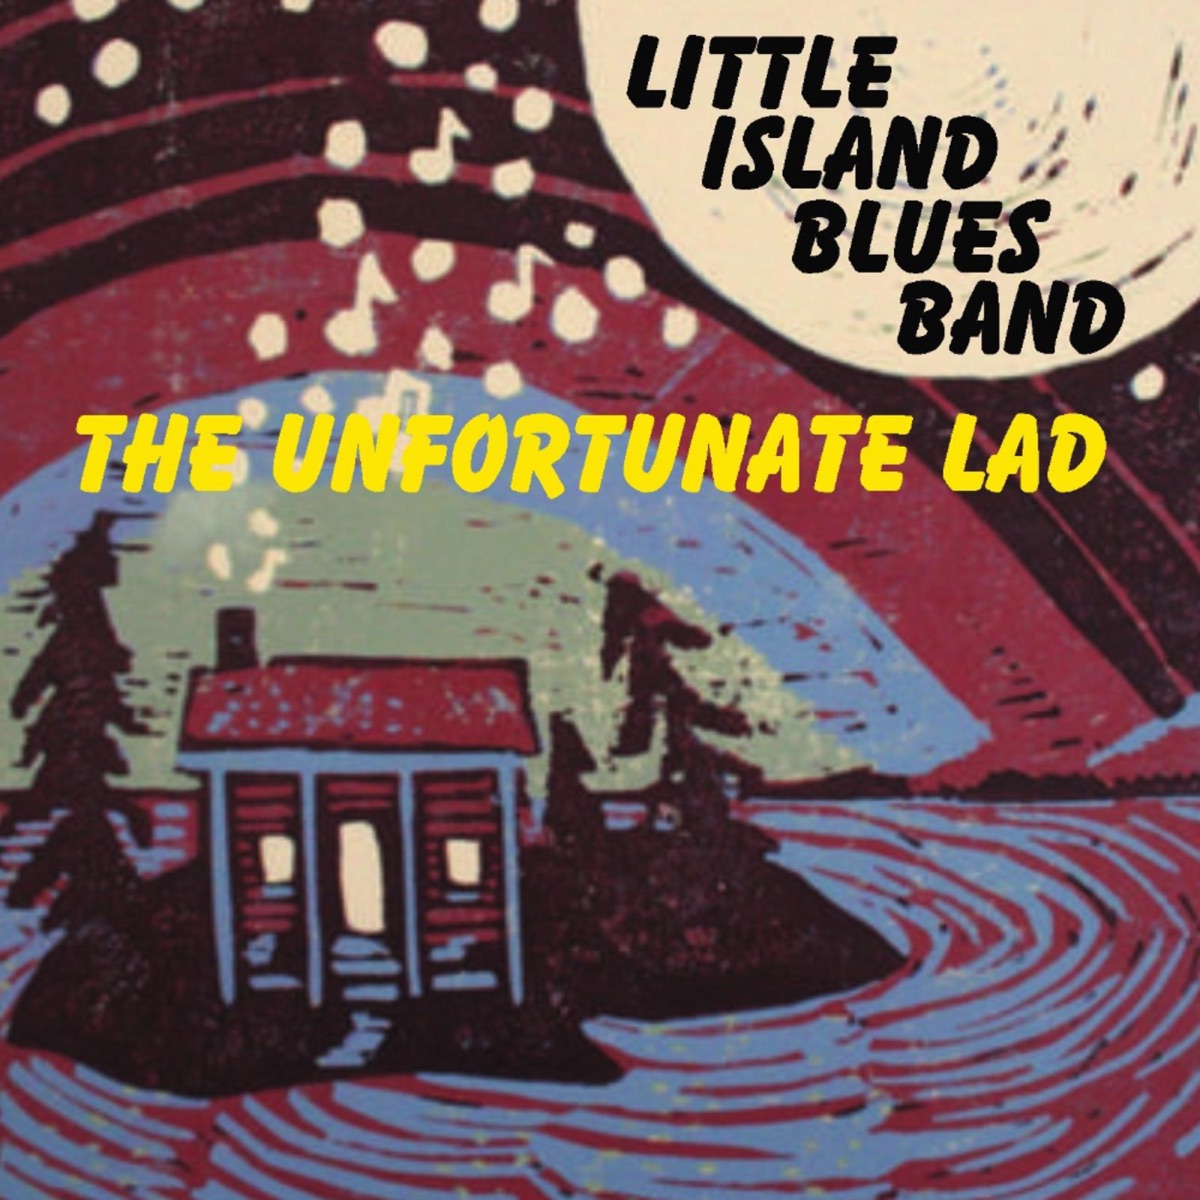 The Unfortunate Lad - EP - Album by Little Island Blues Band - Apple Music